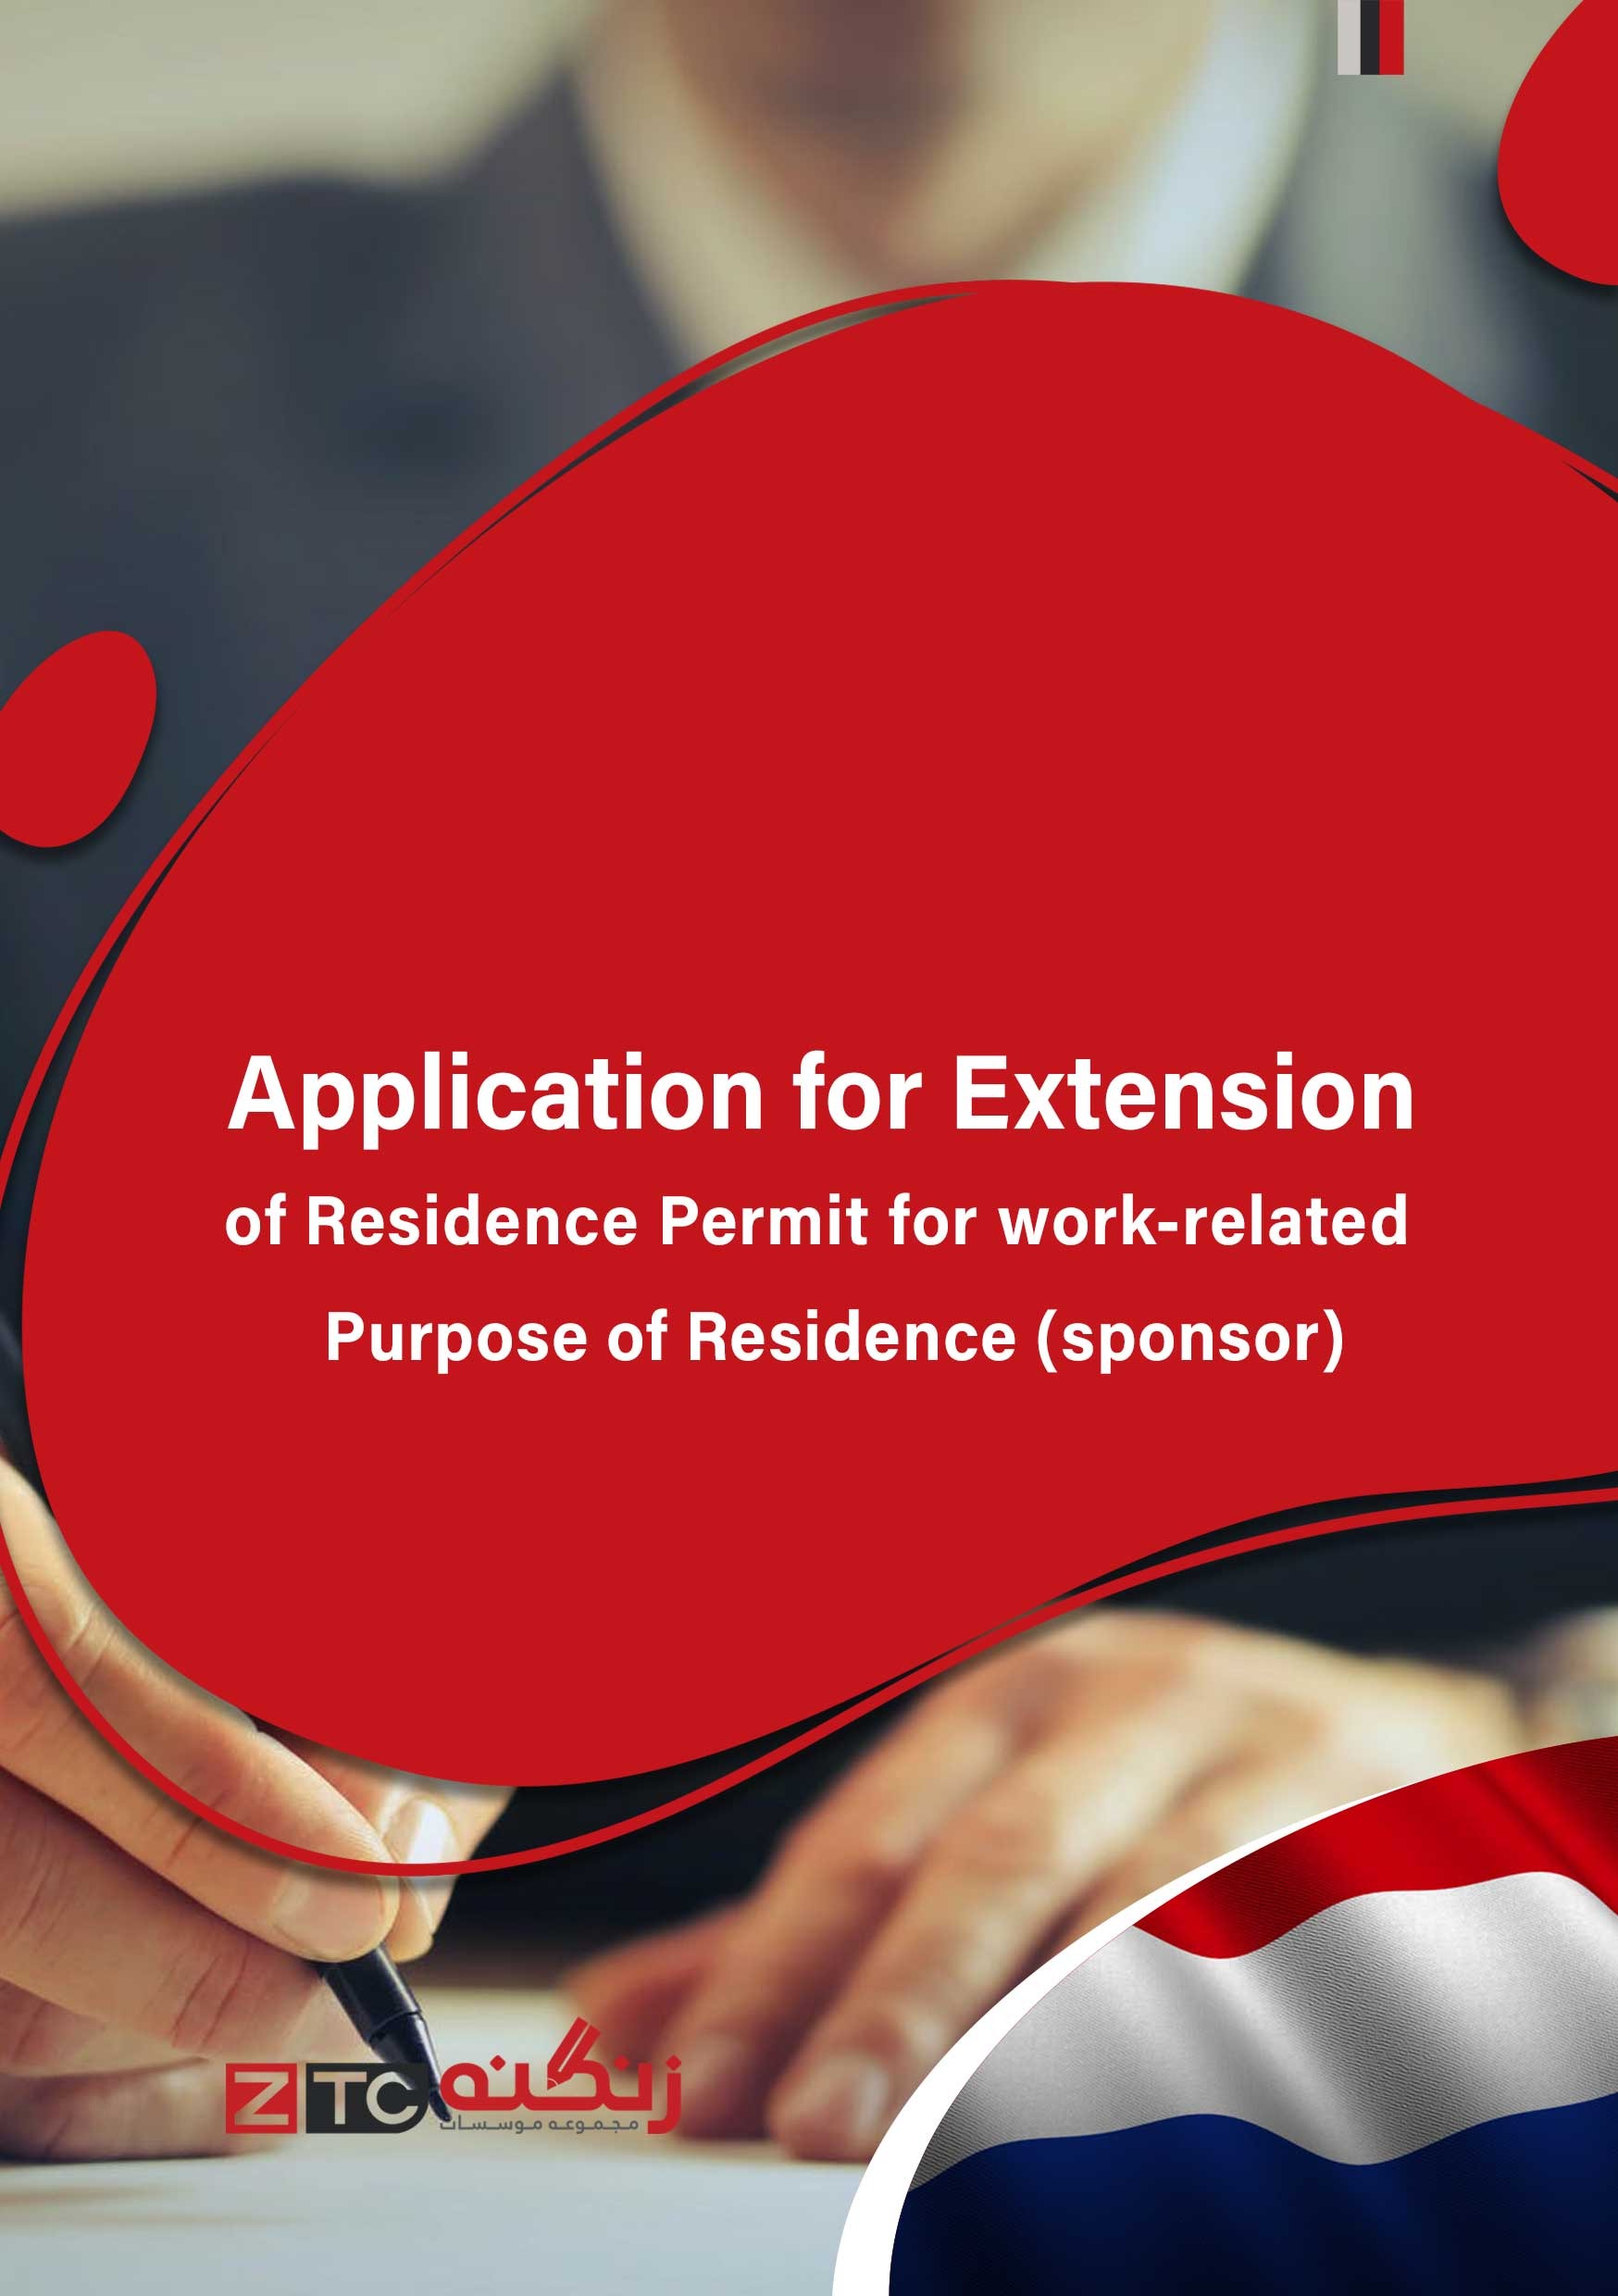 Application for Extension of Residence Permit for work-related Purpose of Residence (sponsor)